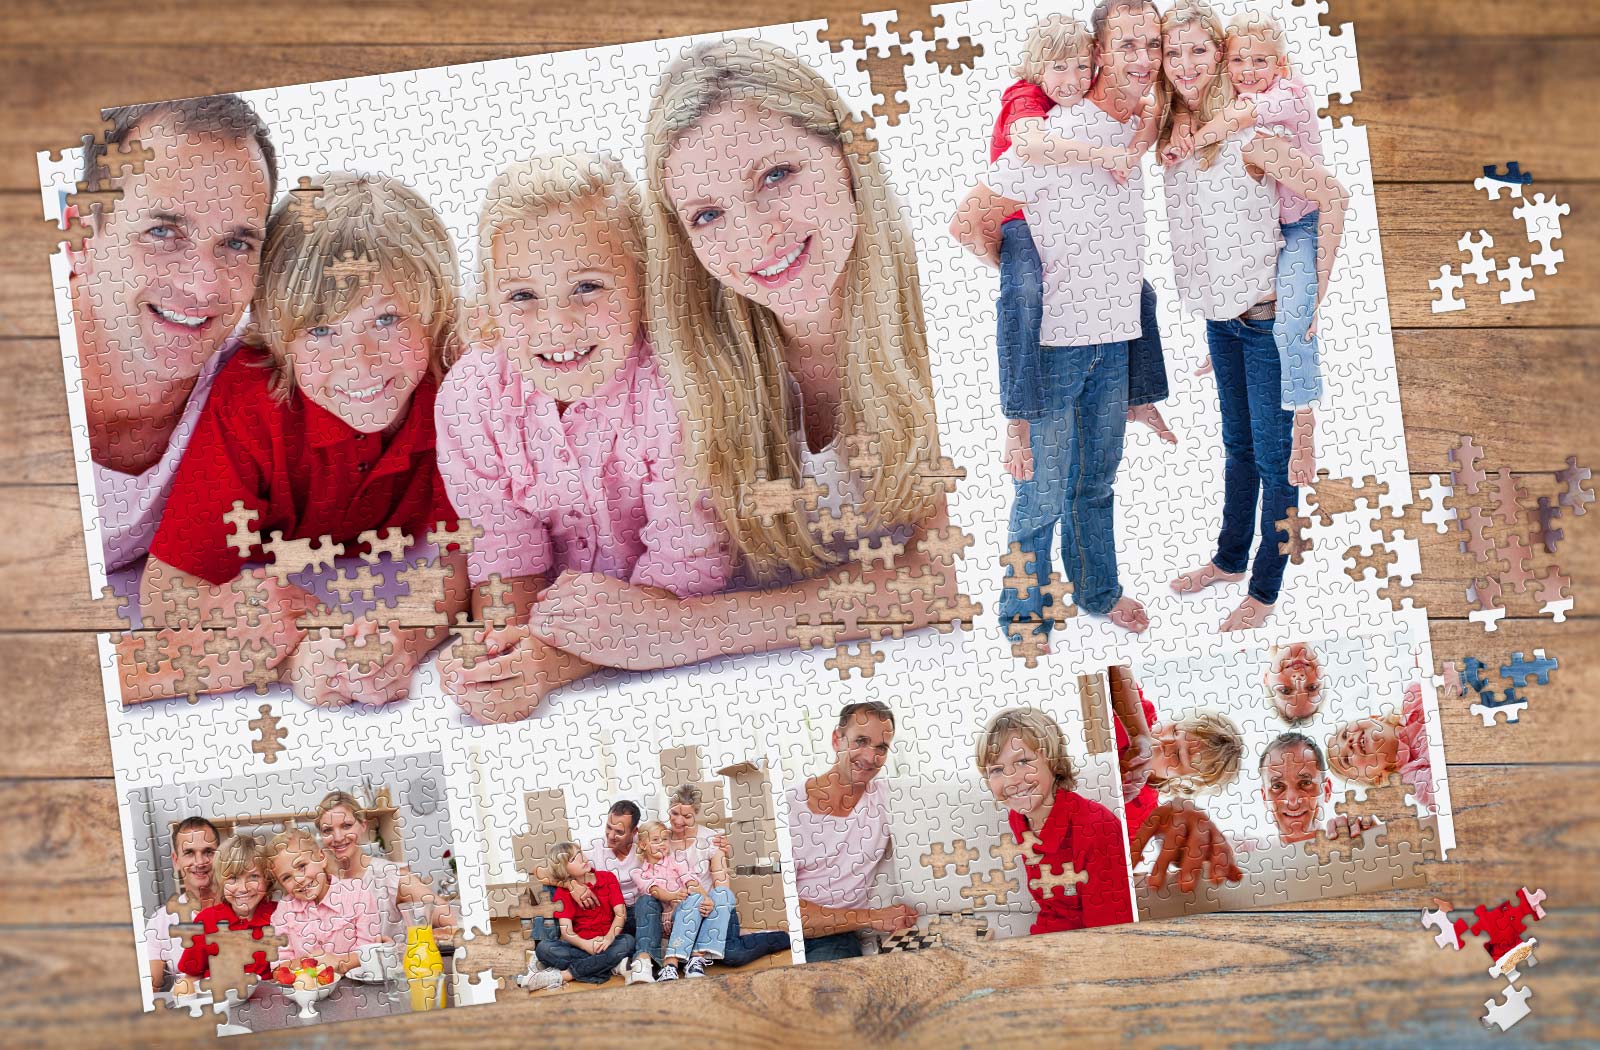 Make A Puzzle From A Photo - How To Guide